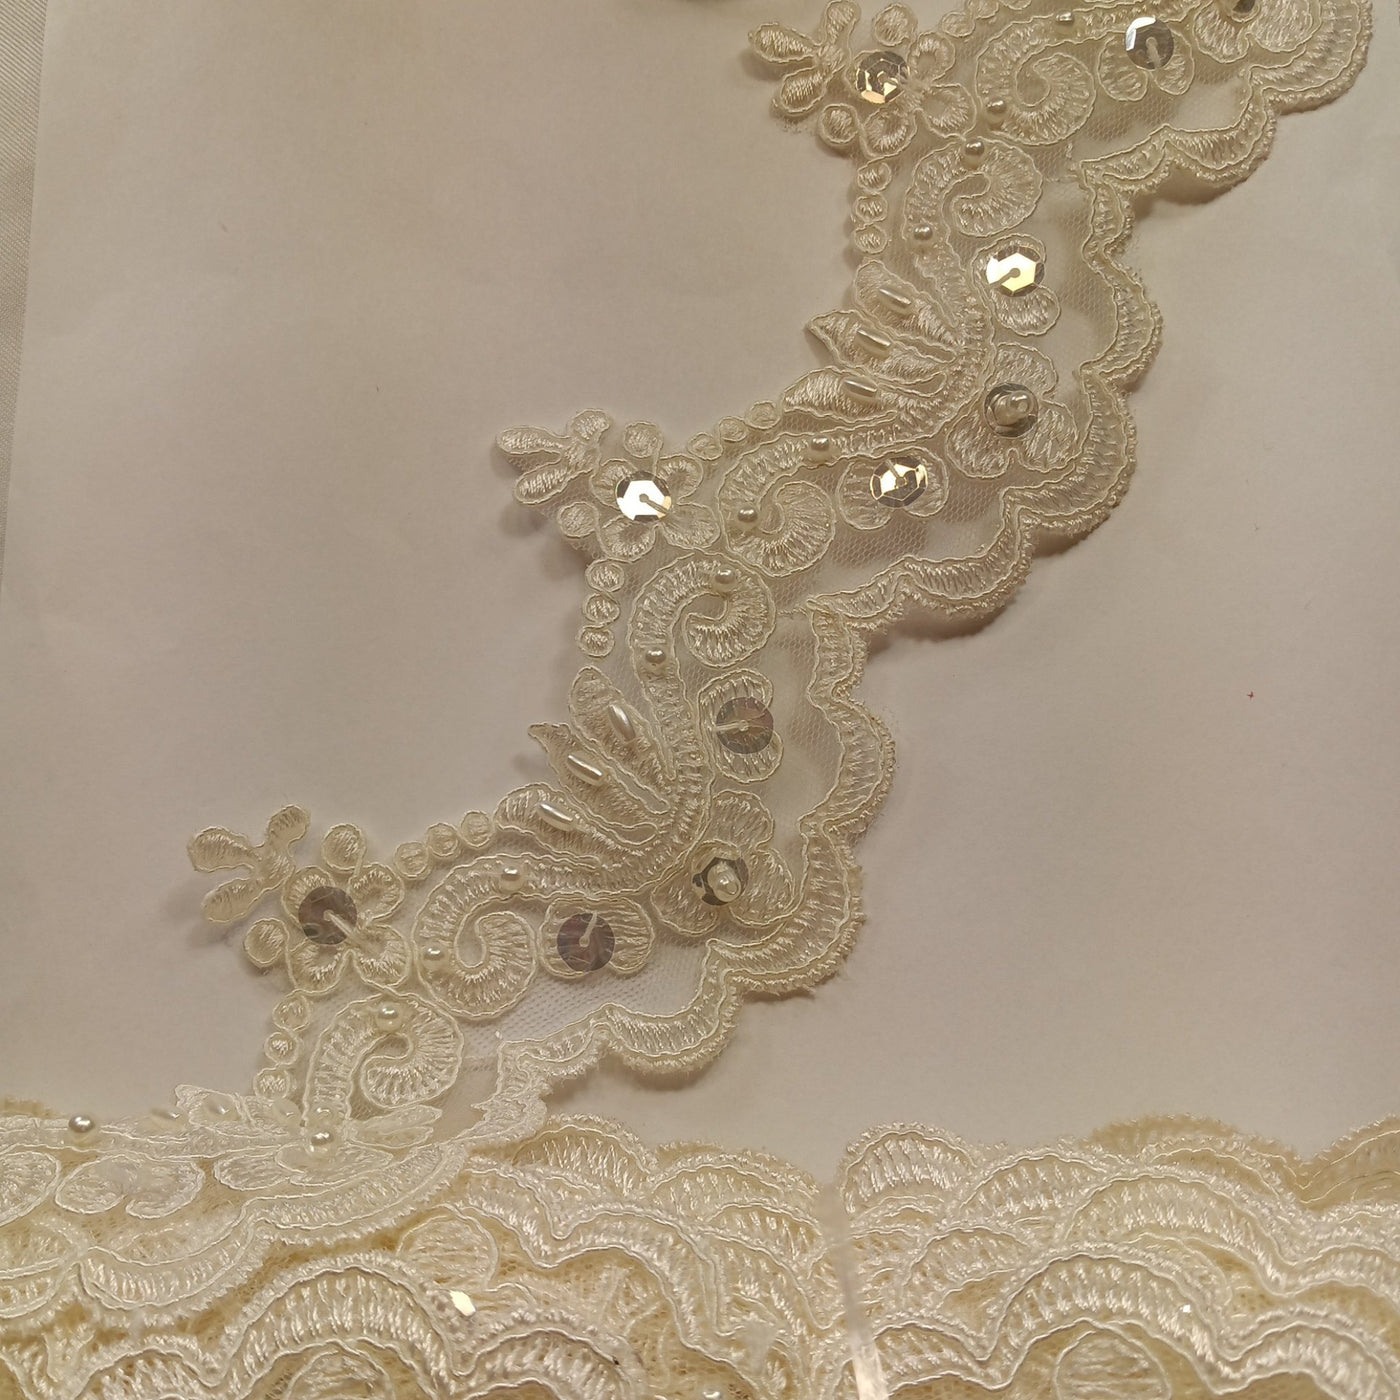 Corded, Beaded & Embroidered Ivory Trimming. Lace Usa